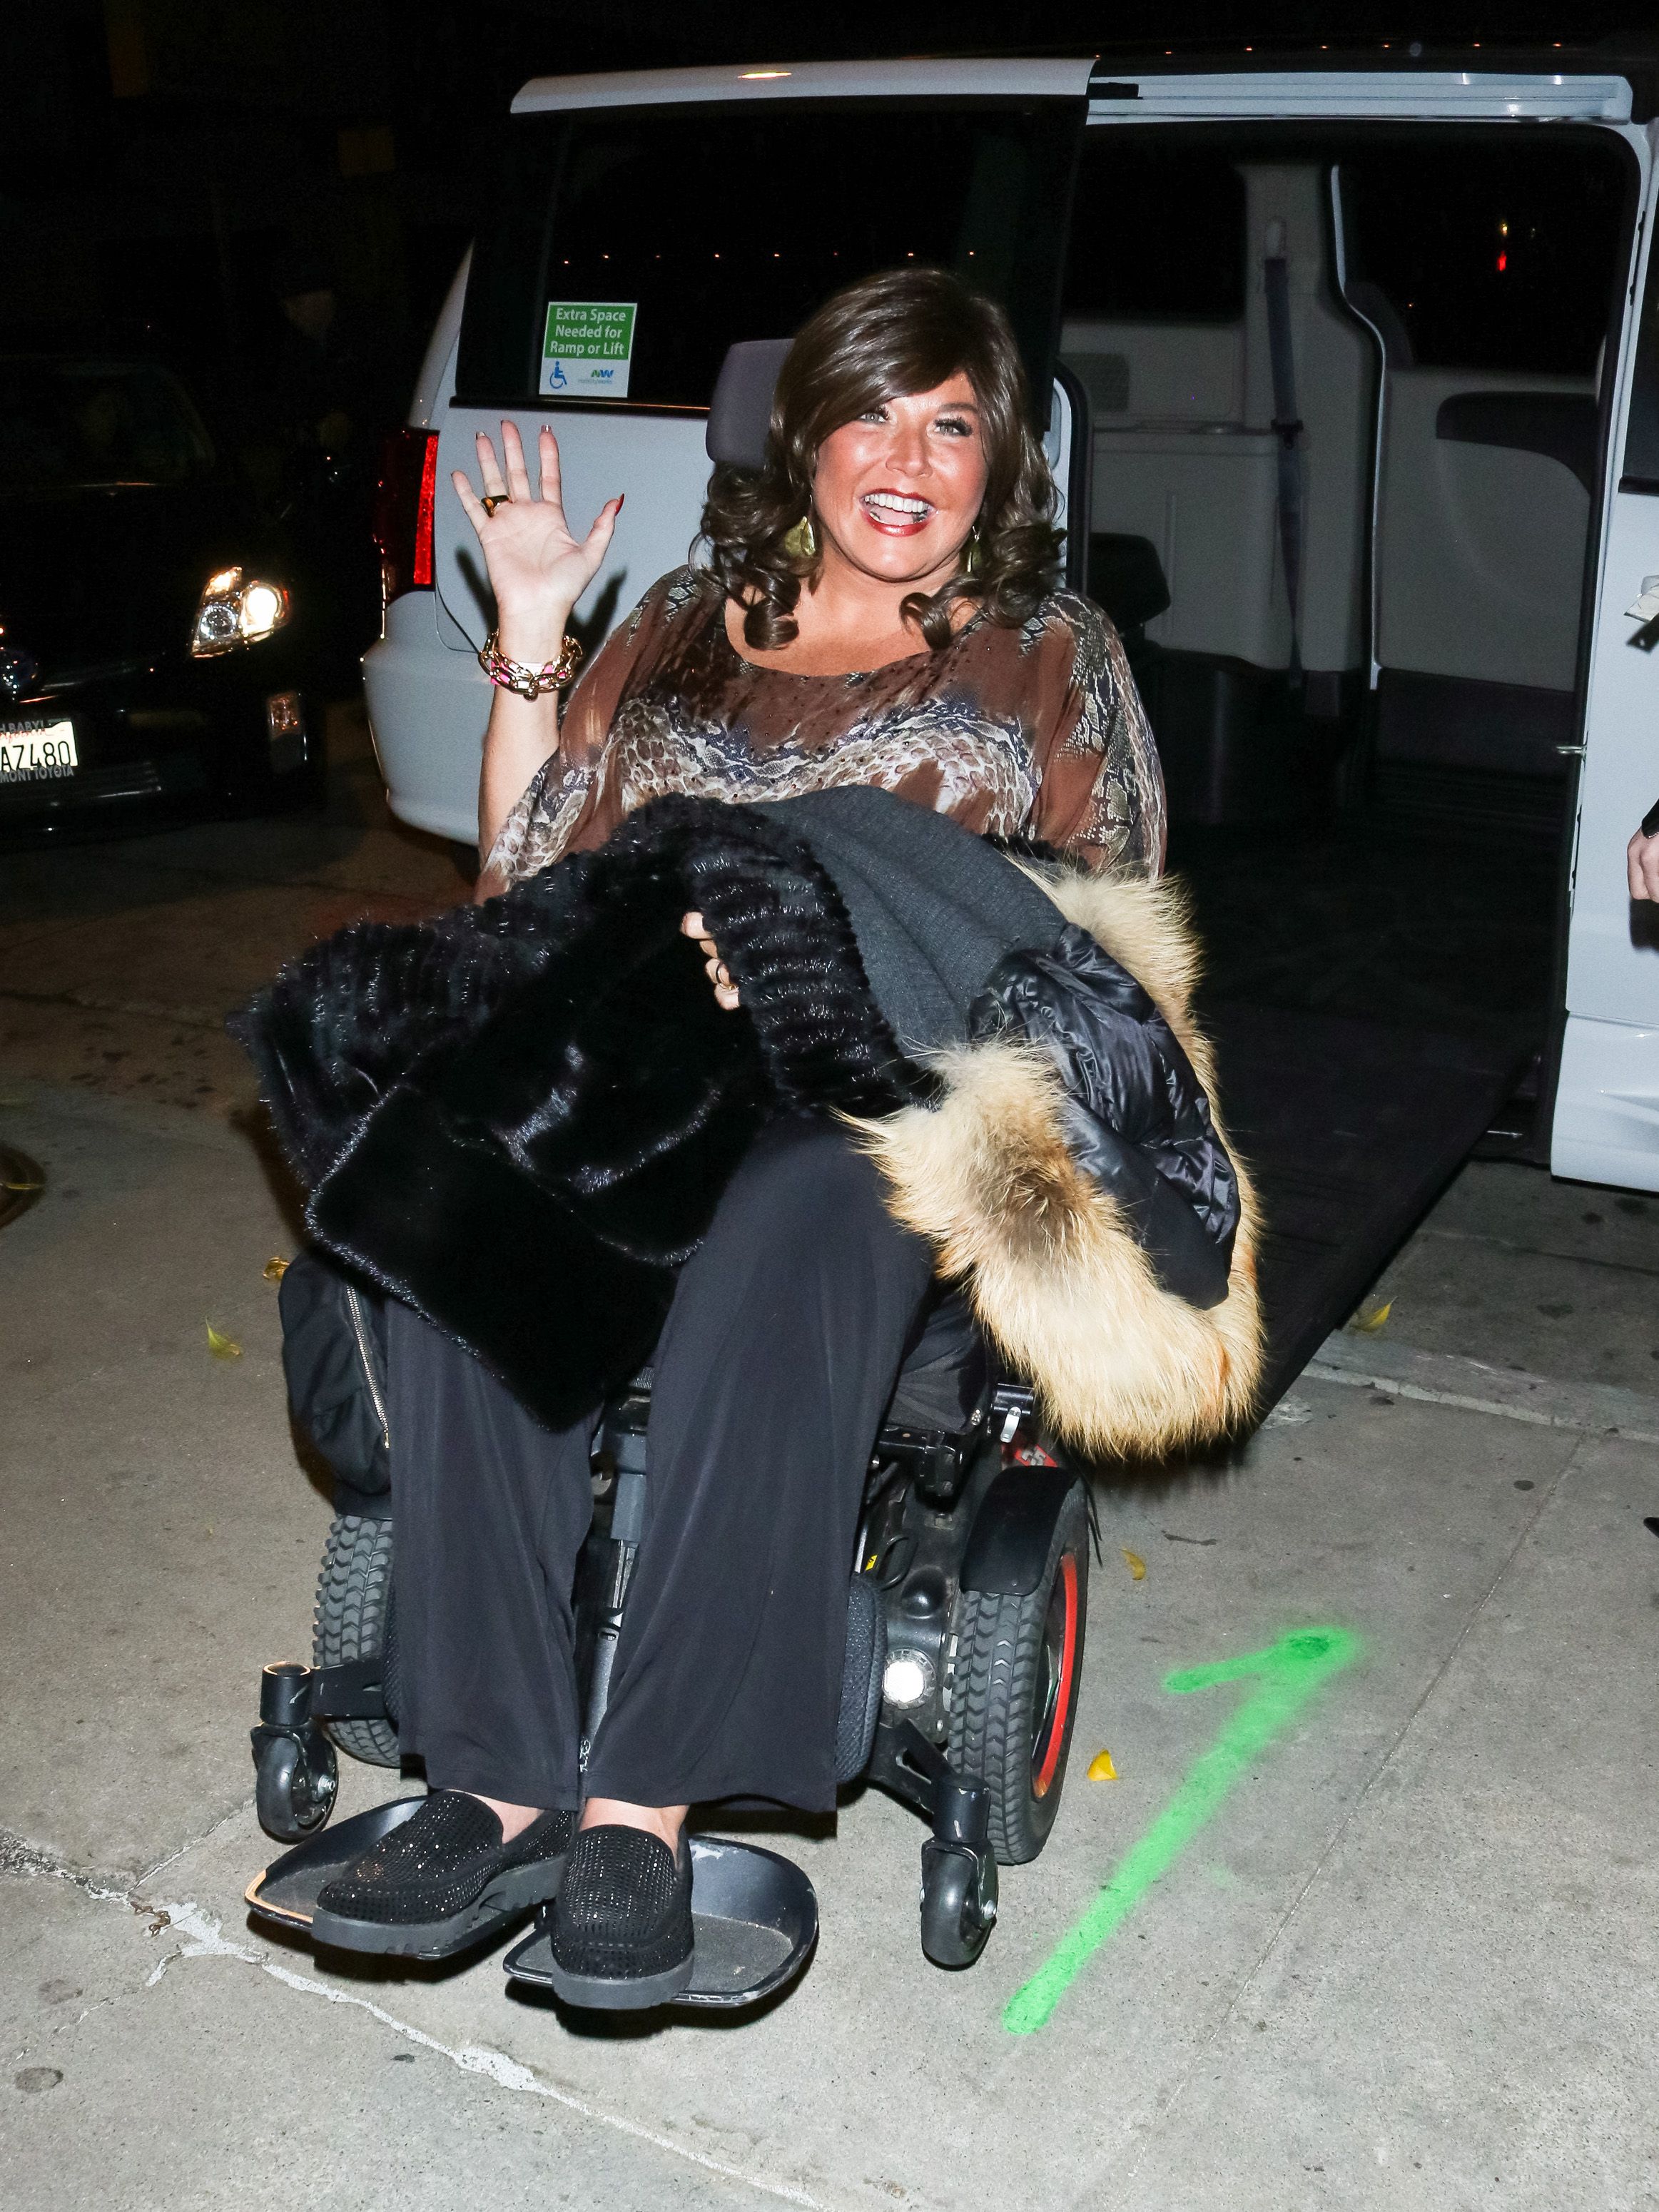 Abby Lee Miller Says She's 'Regressing' Every Day Without PT